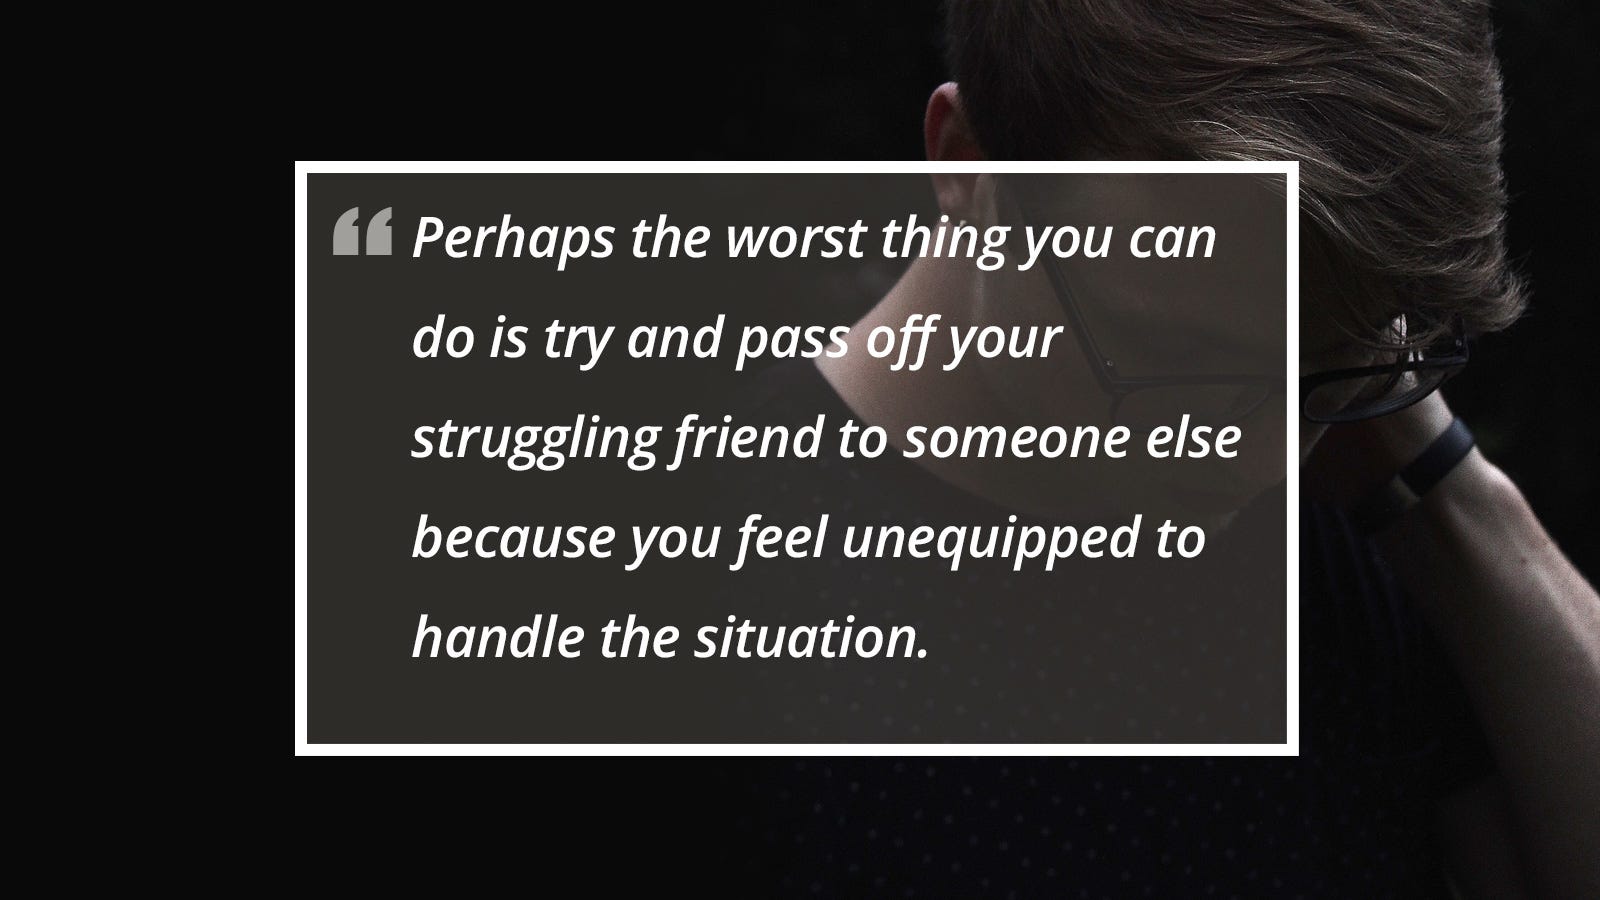 7 simple ways you can help someone struggling with suicide